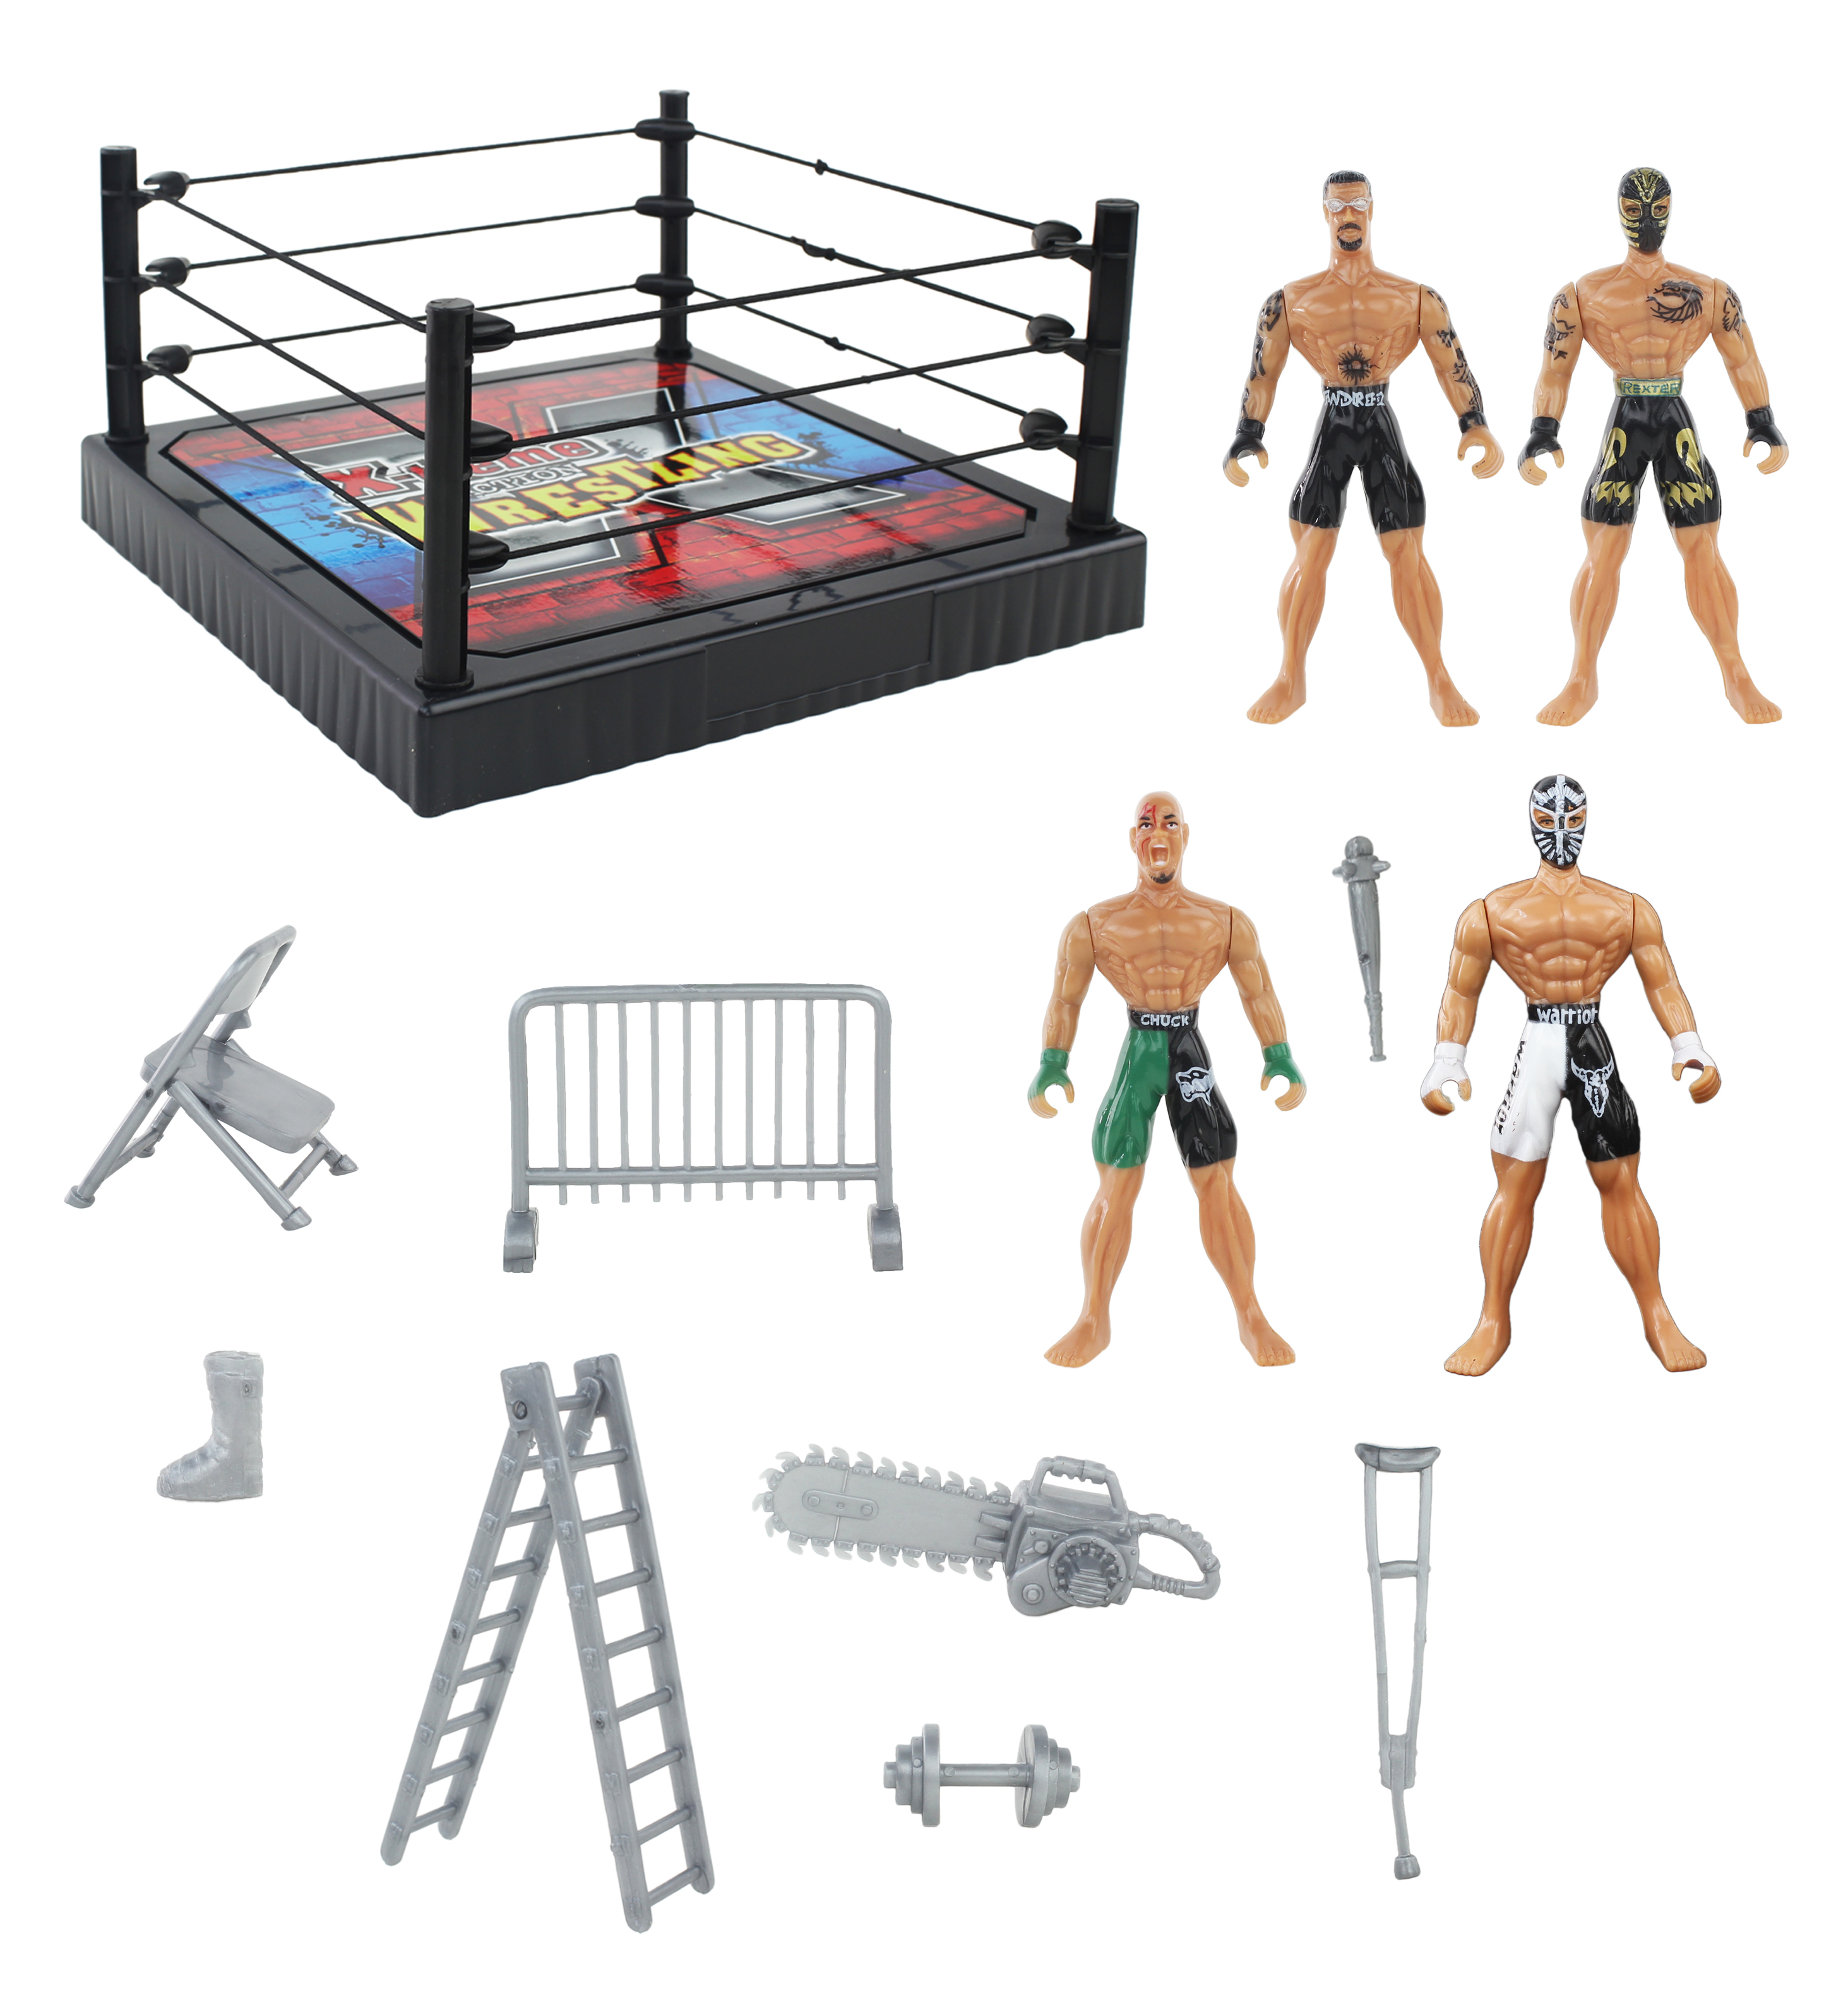 Build A Toy Wrestling Ring Pdf,Beginner Easy Diy Wood Projects Quote,Woodwo...